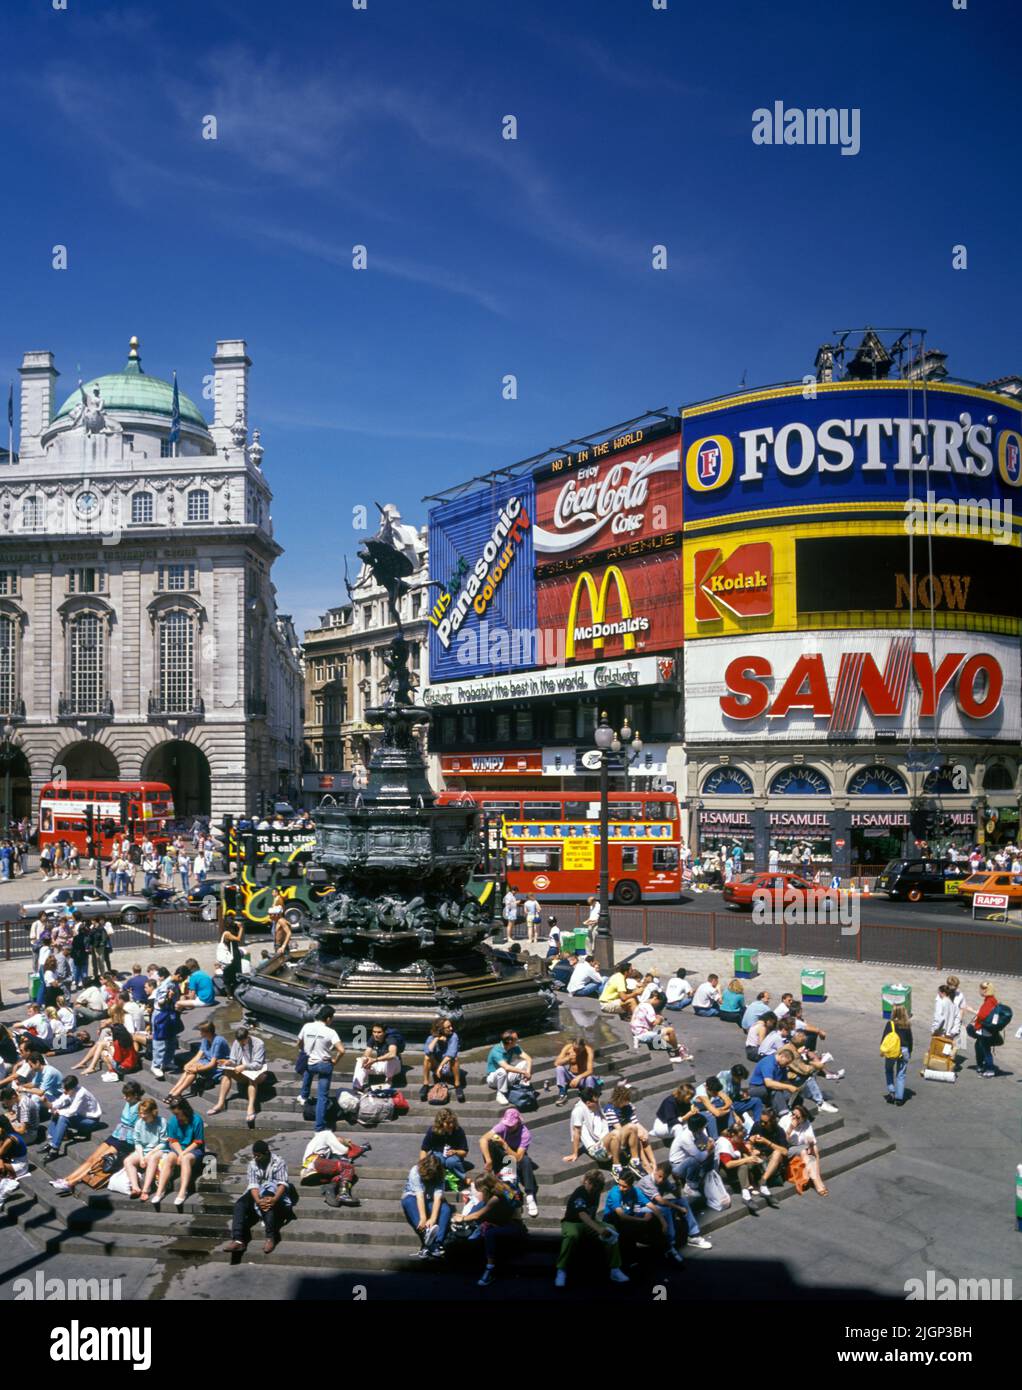 1989 HISTORICAL RED BUSES PICCADILLY CIRCUS WEST END LONDON ENGLAND UK Stock Photo